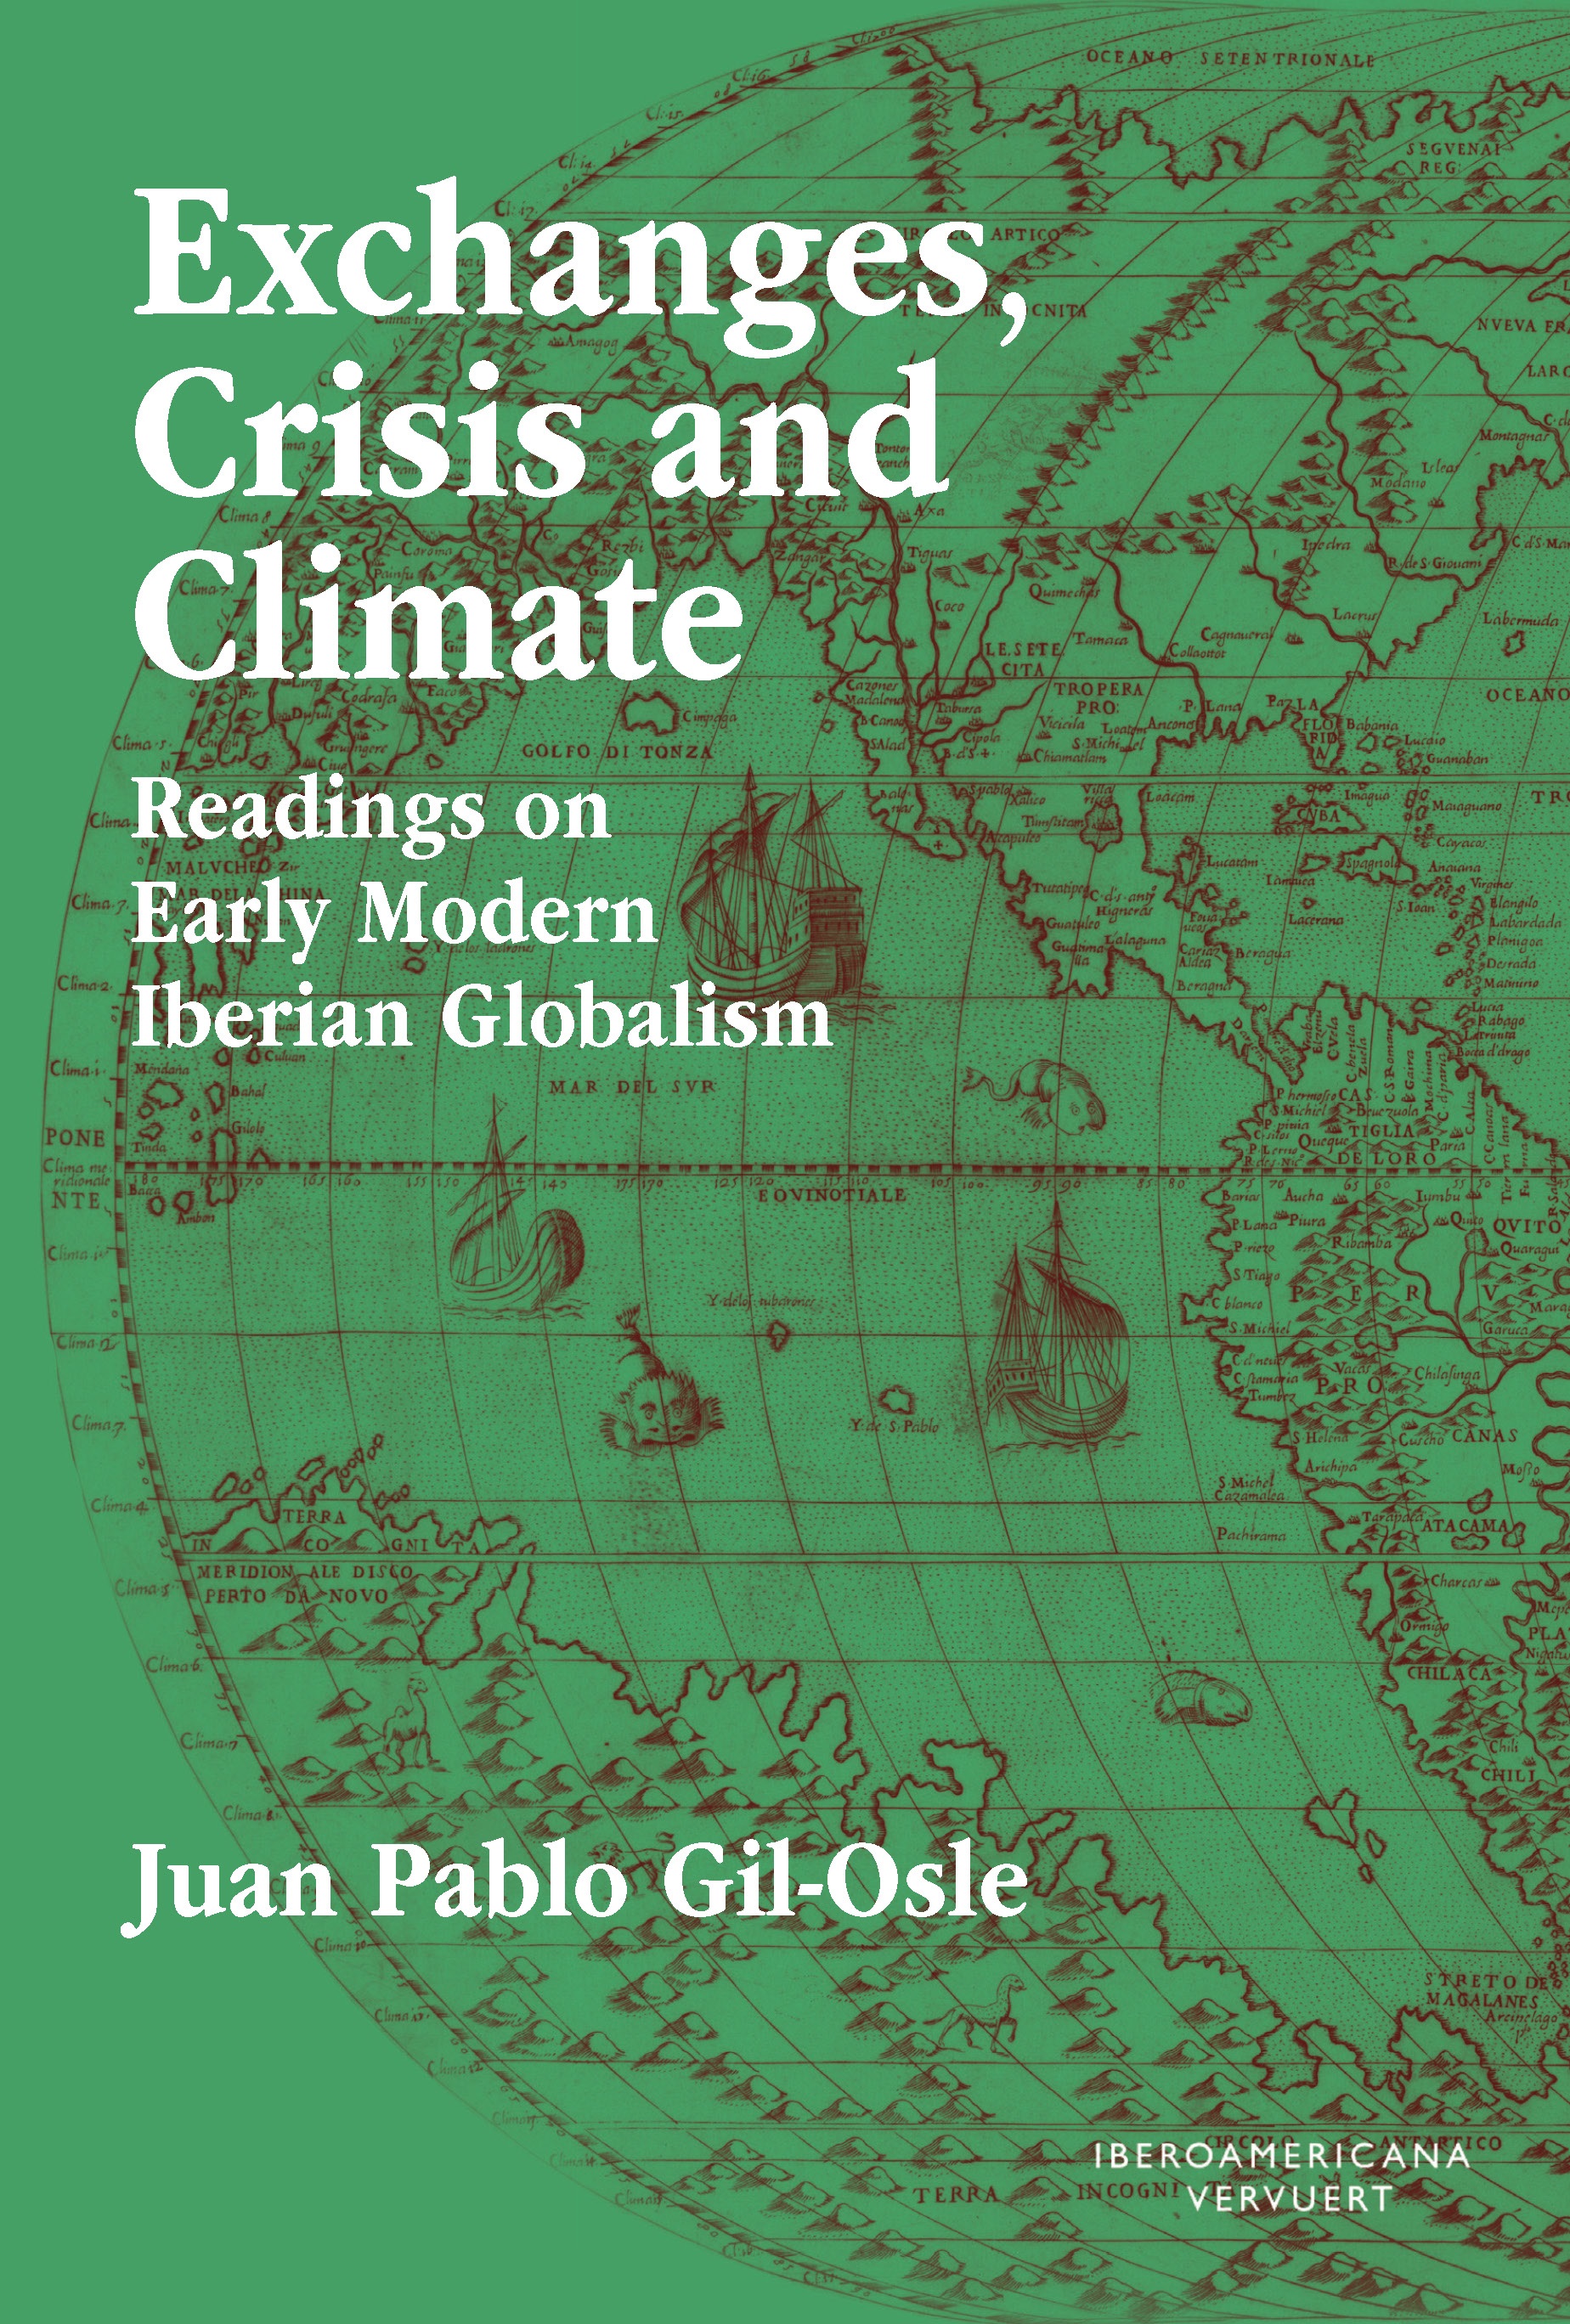 Exchanges, Crisis and Climate. 9788491923879